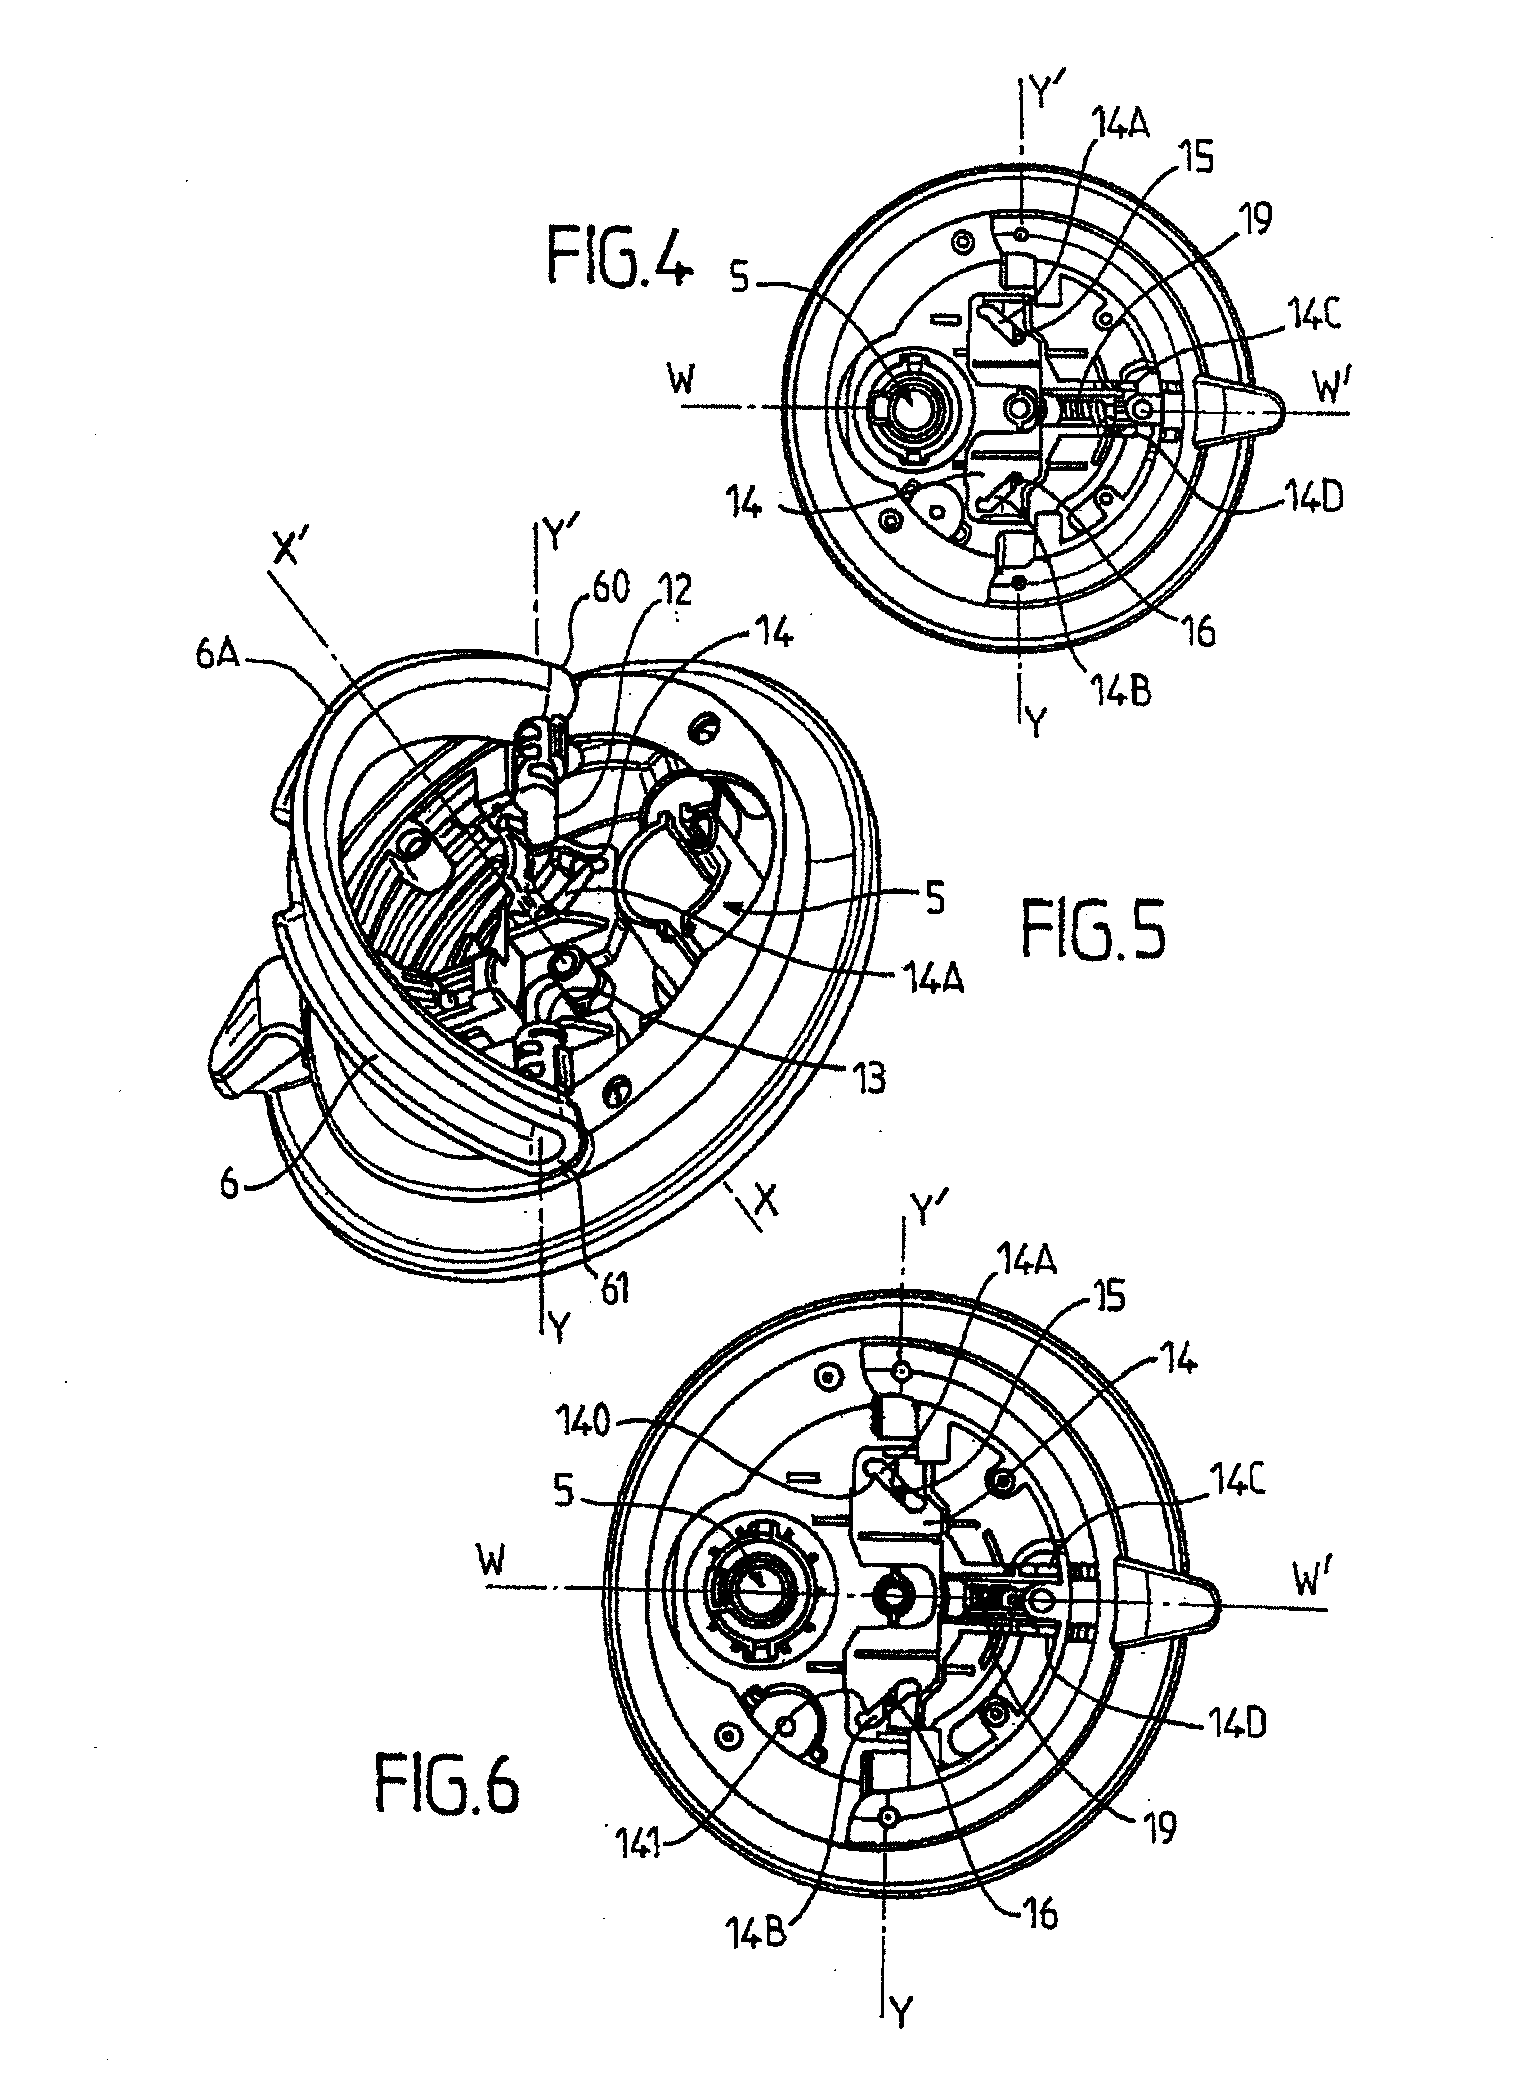 Pressure-cooking utensil provided with a locking/unlocking control member that operates asymmetrically